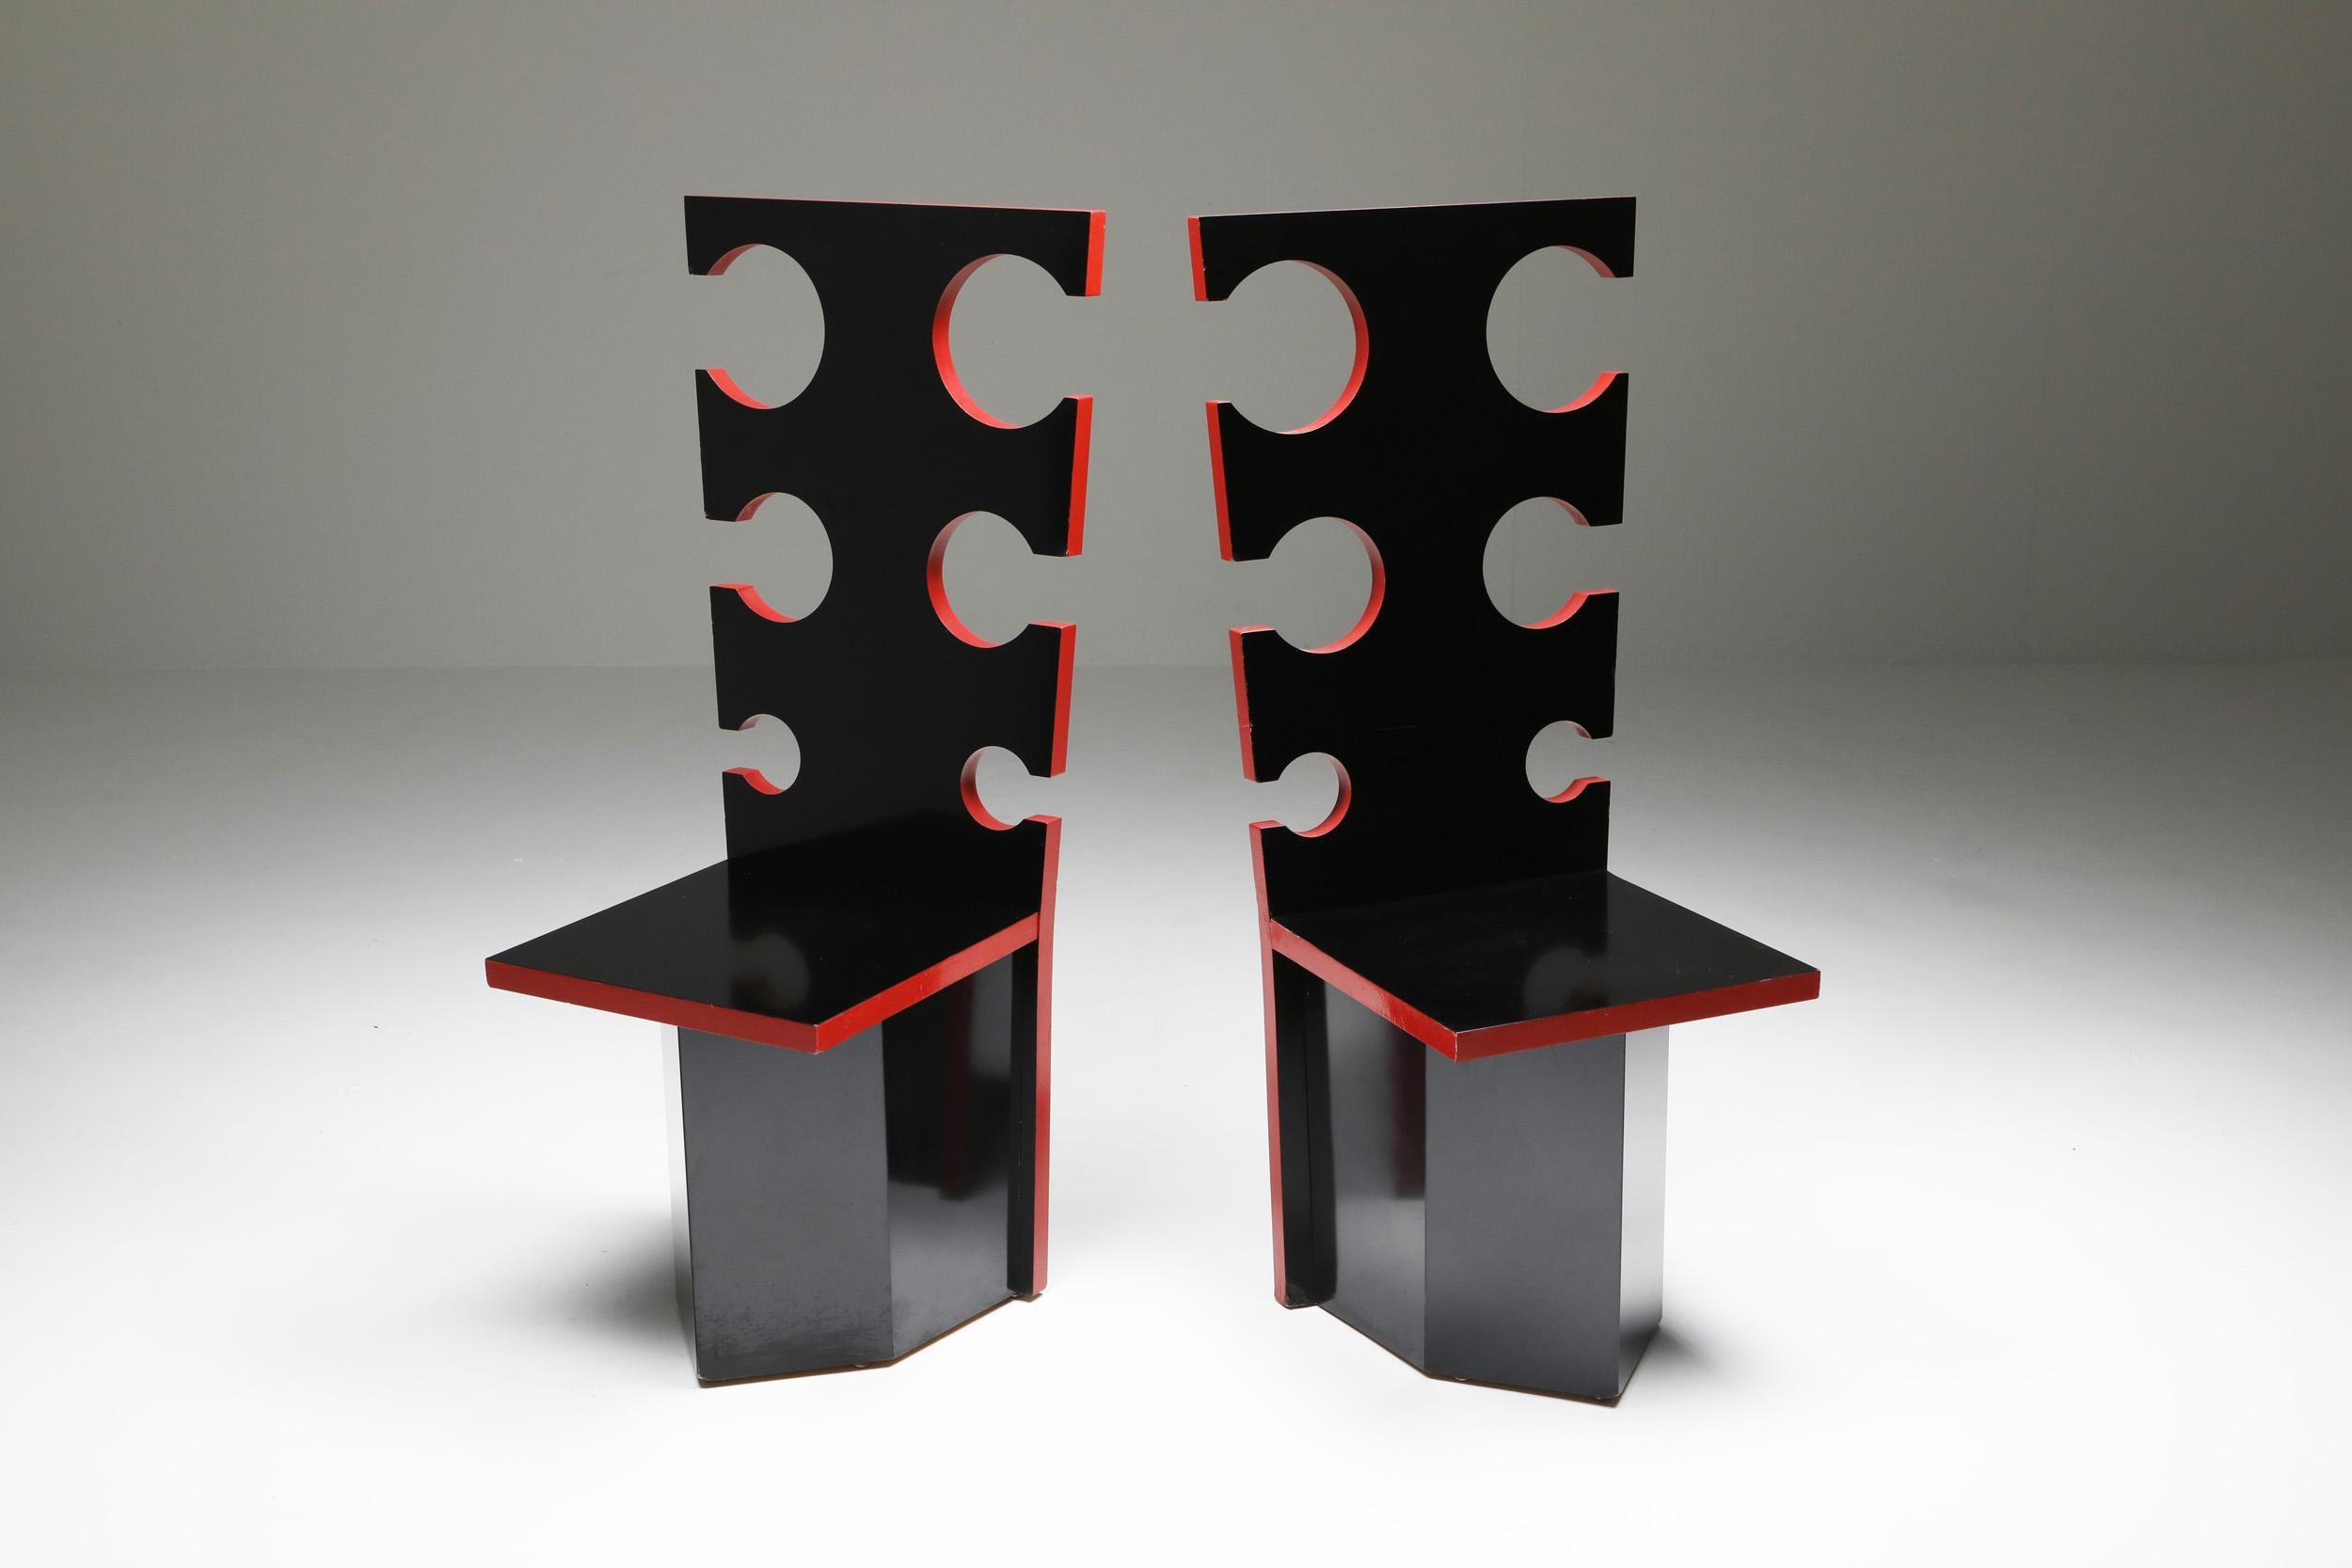 Black lacquer with red edges by Max Papiri, functional art, collectible design.

Designed on request by and for the private home of Mario Sabot. The intriguing design shows straight cut-out backrests and rectangular seats on a polygonal base. The